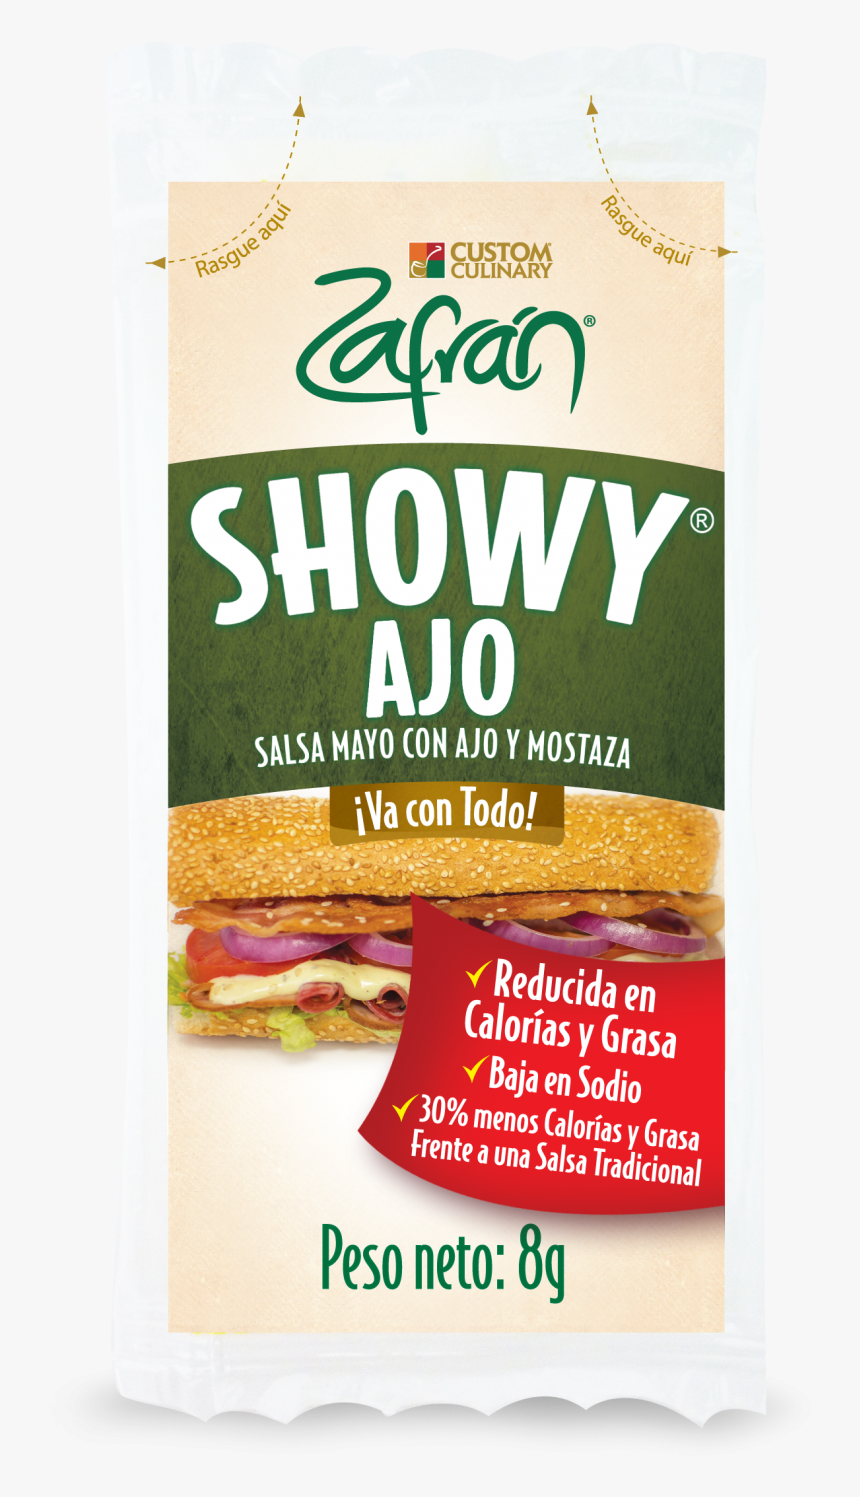 Showy Ajo Sachet 8g Cara - Convenience Food, HD Png Download, Free Download